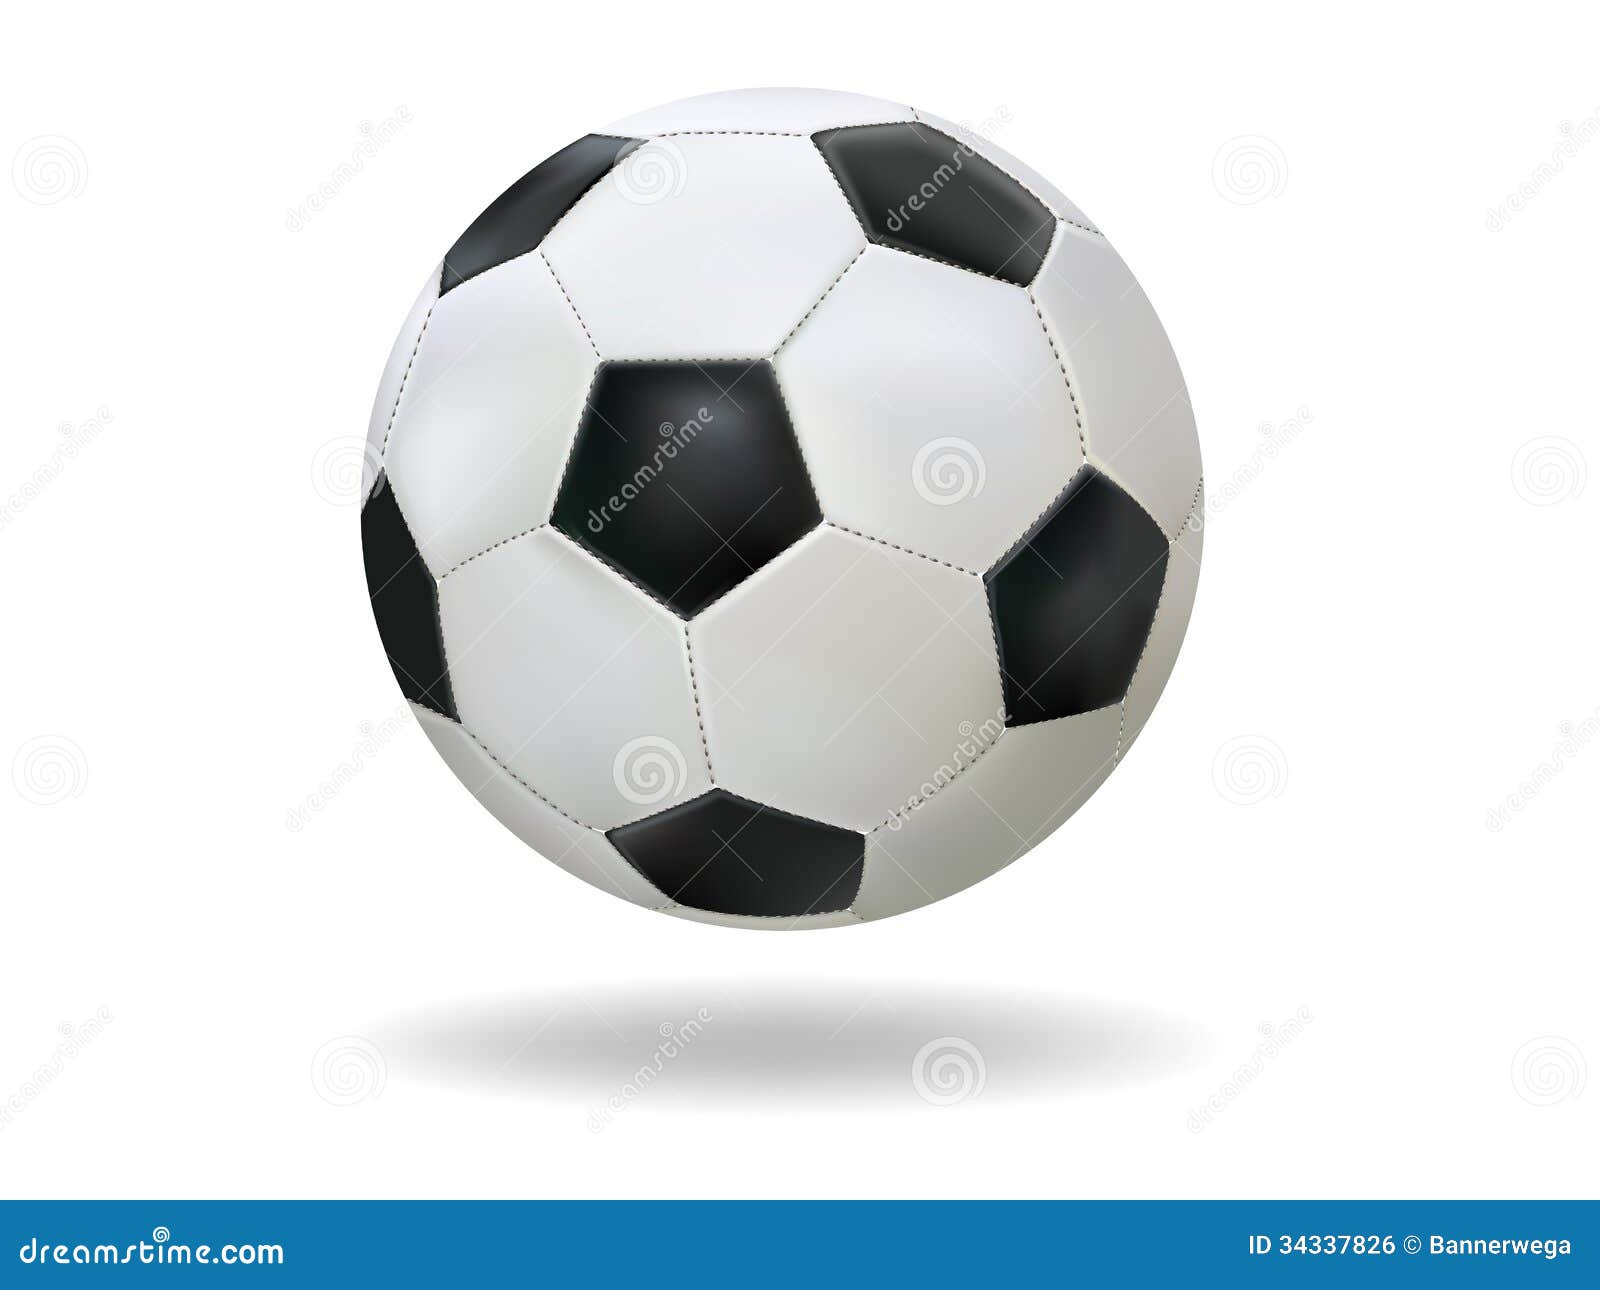 Realistic soccer ball ( Football ) on white background